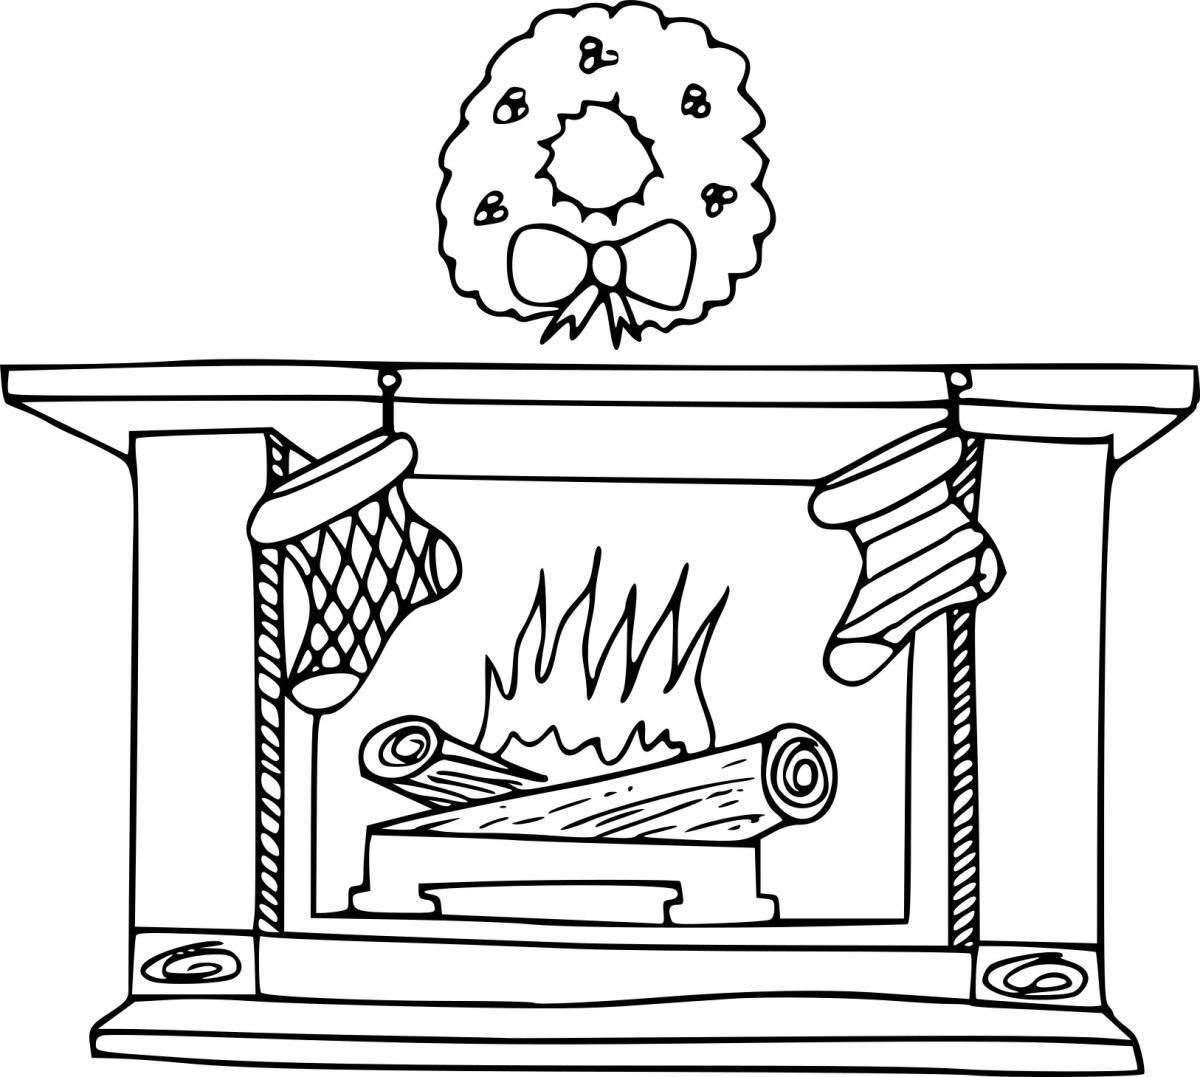 A fun fireplace coloring book for kids